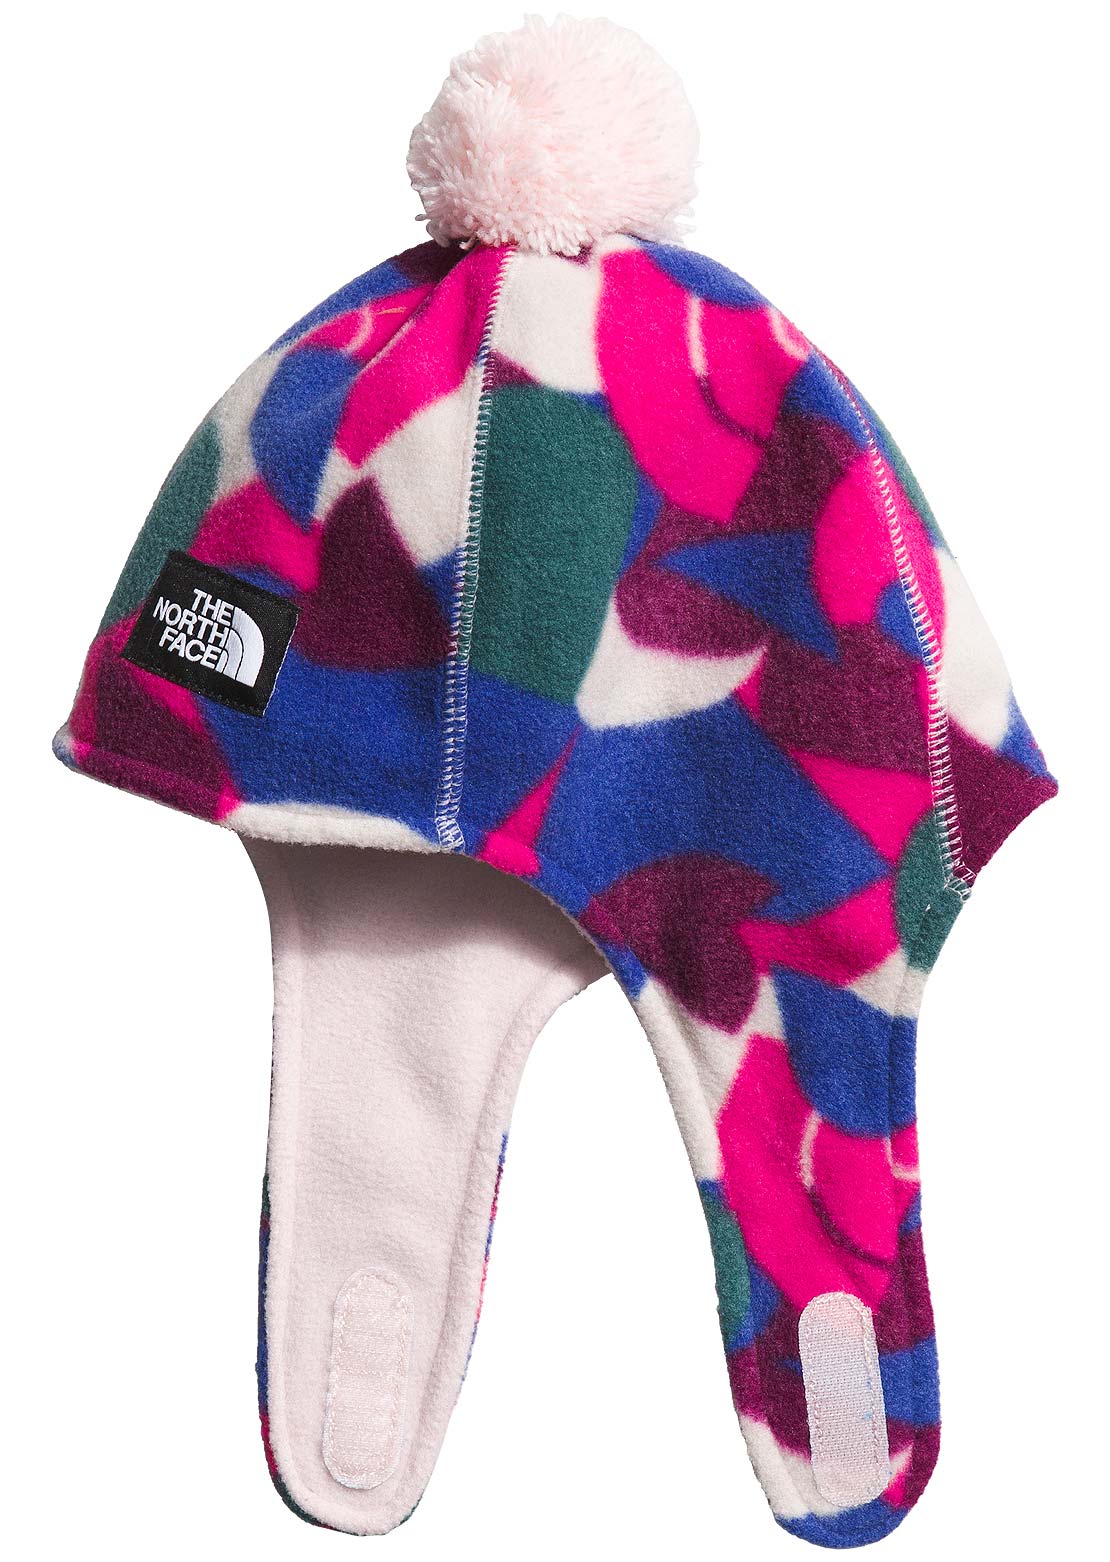 The North Face Infant Glacier Earflap Beanie Mr. Pink Big Abstract Print